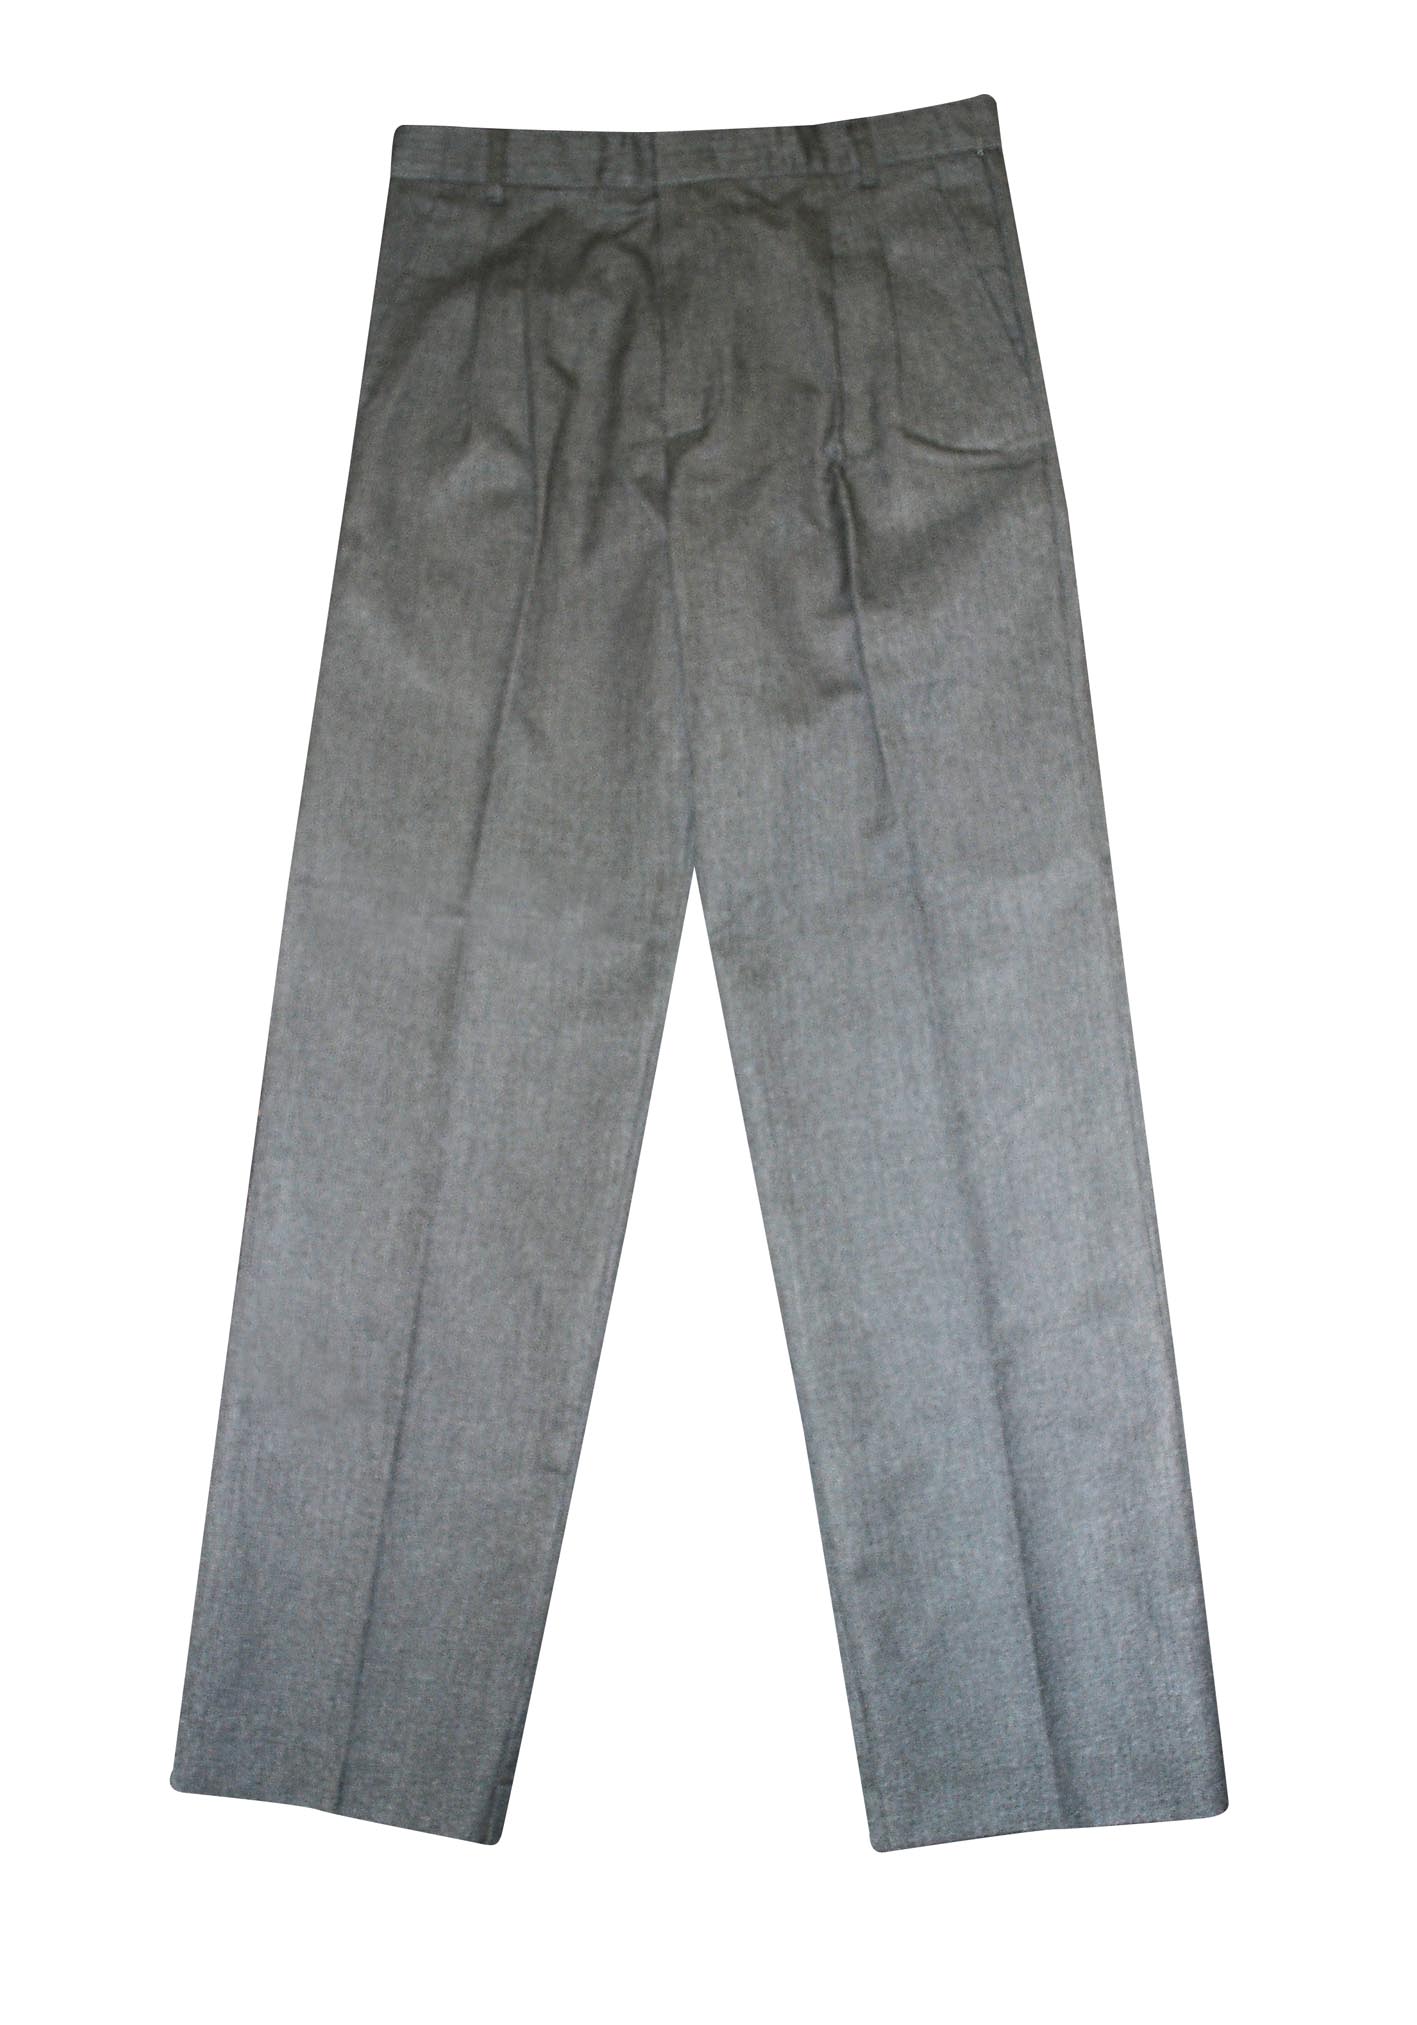 St Paul's Grey Tailored Pants - Senior | Shop at Pickles Schoolwear ...